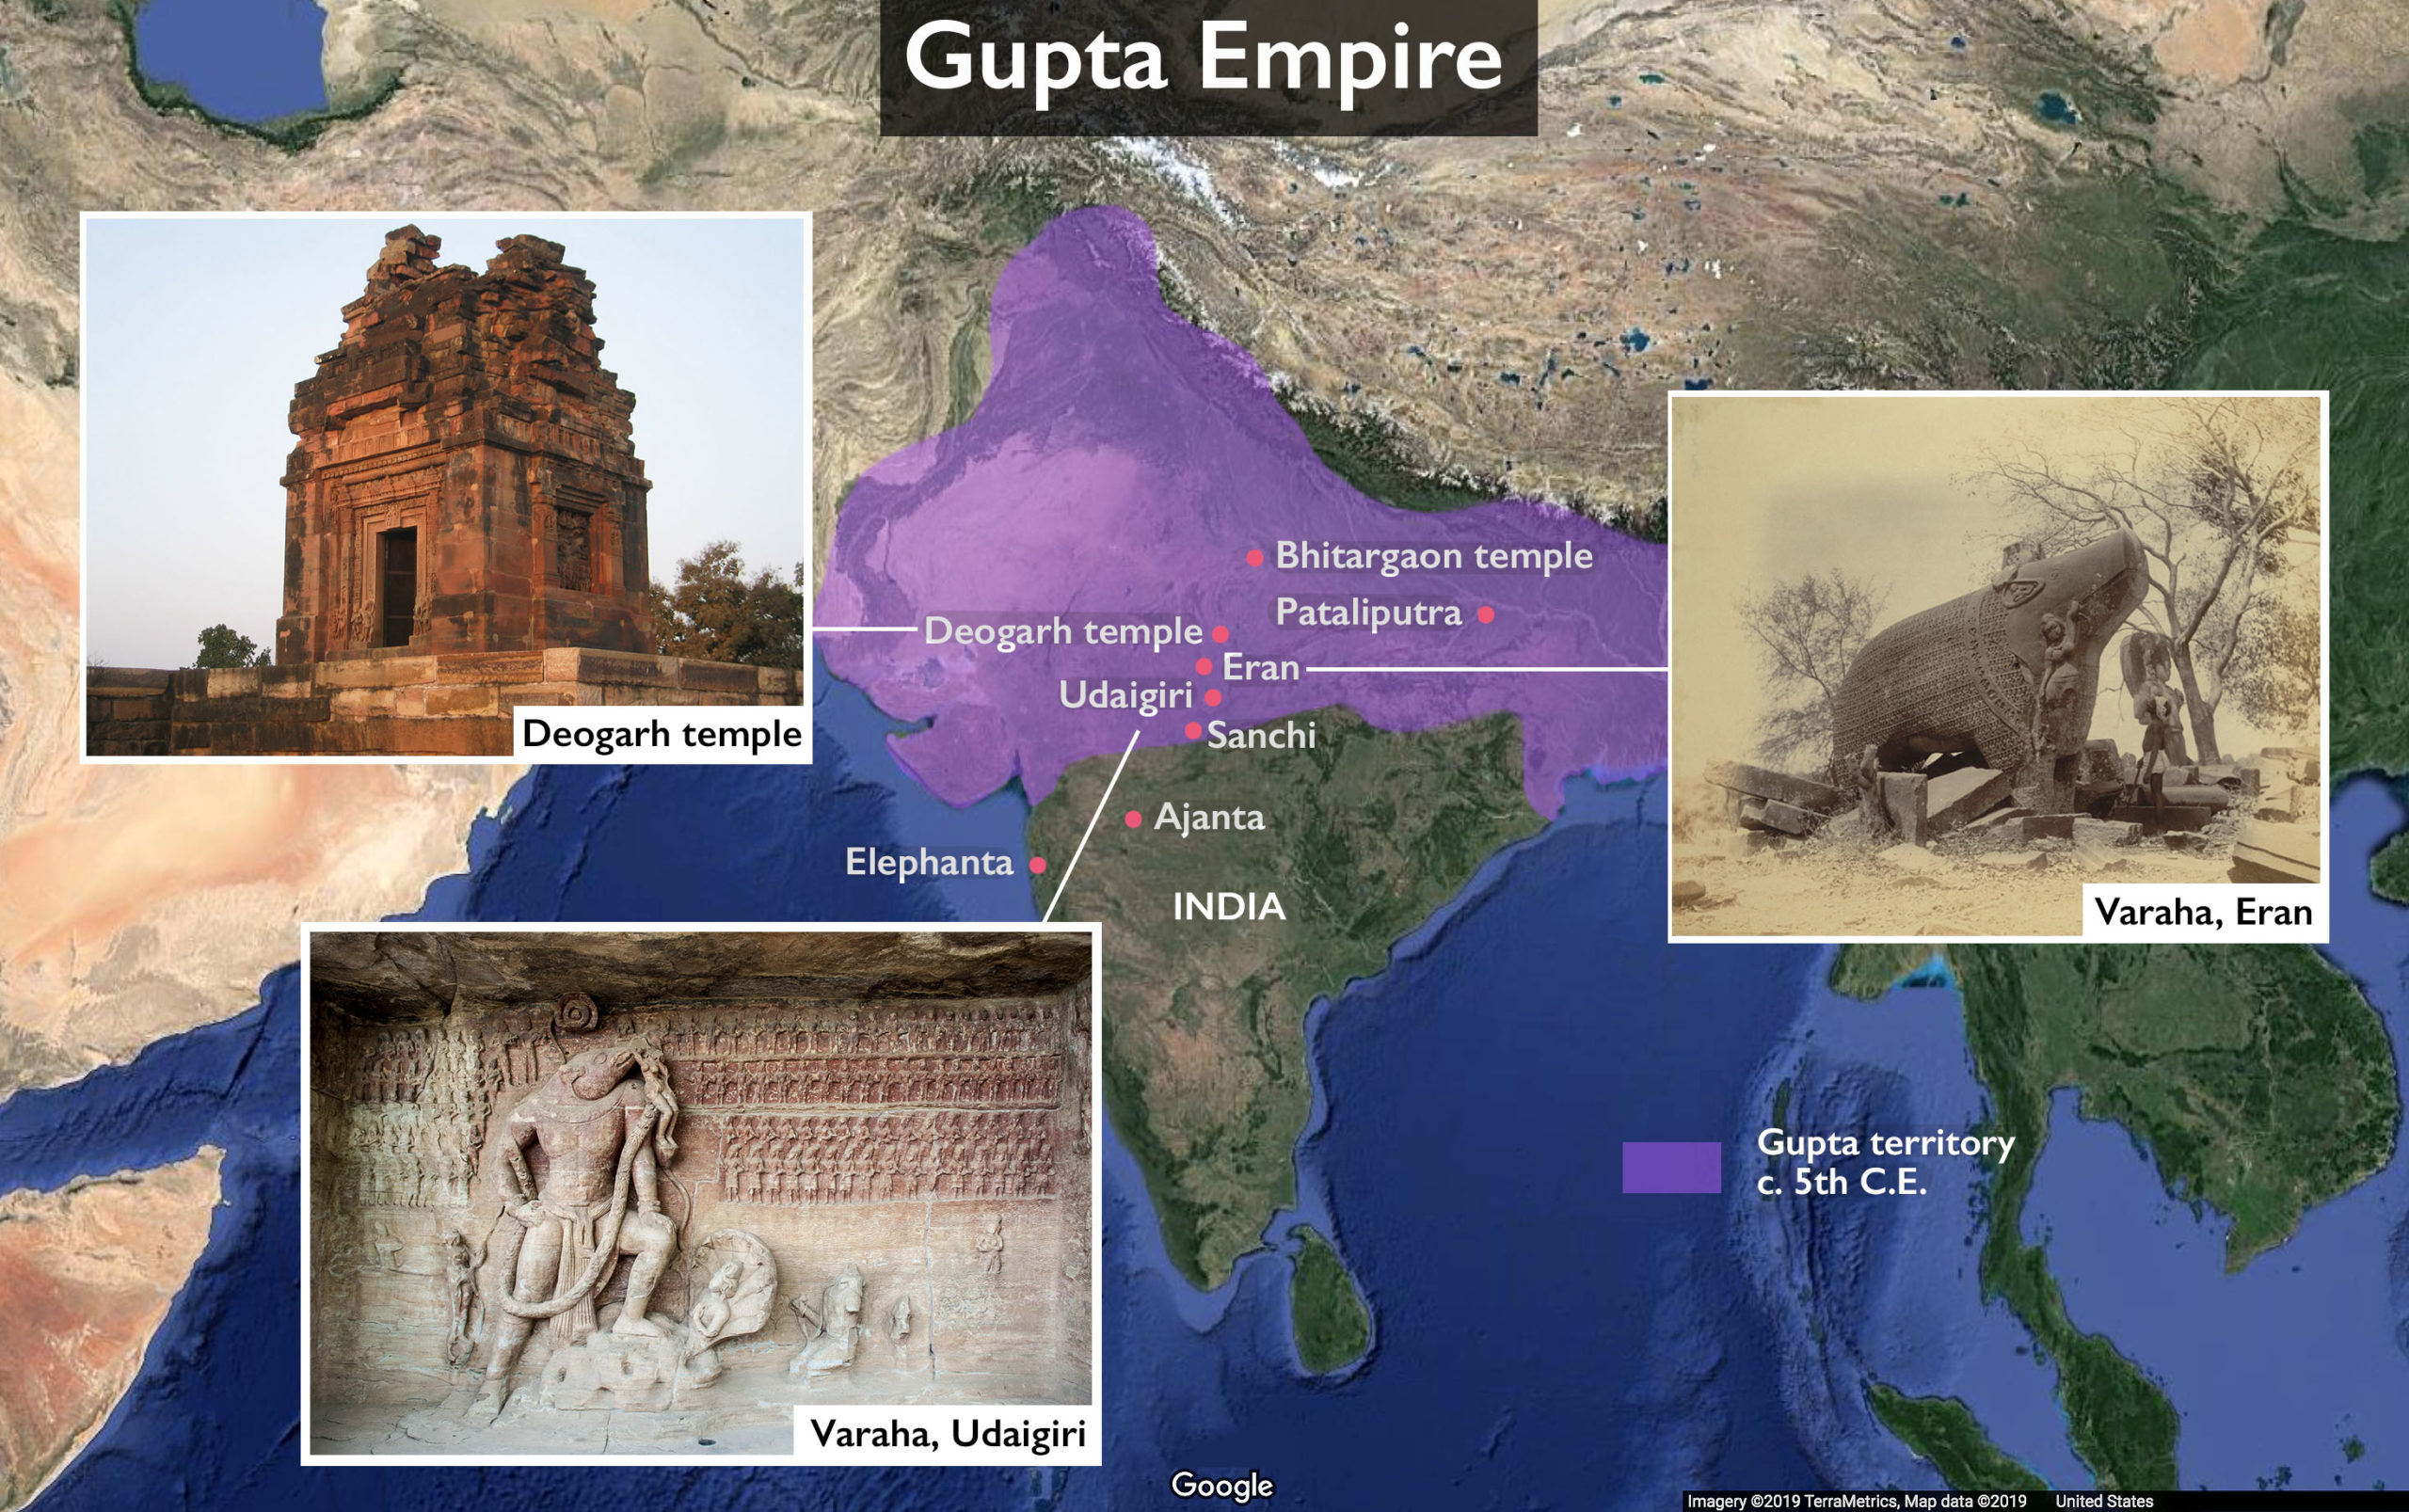 Approximate extent of the Gupta Empire, c. 5th century C.E. Adapted from Woudloper, CC BY-SA 4.0.